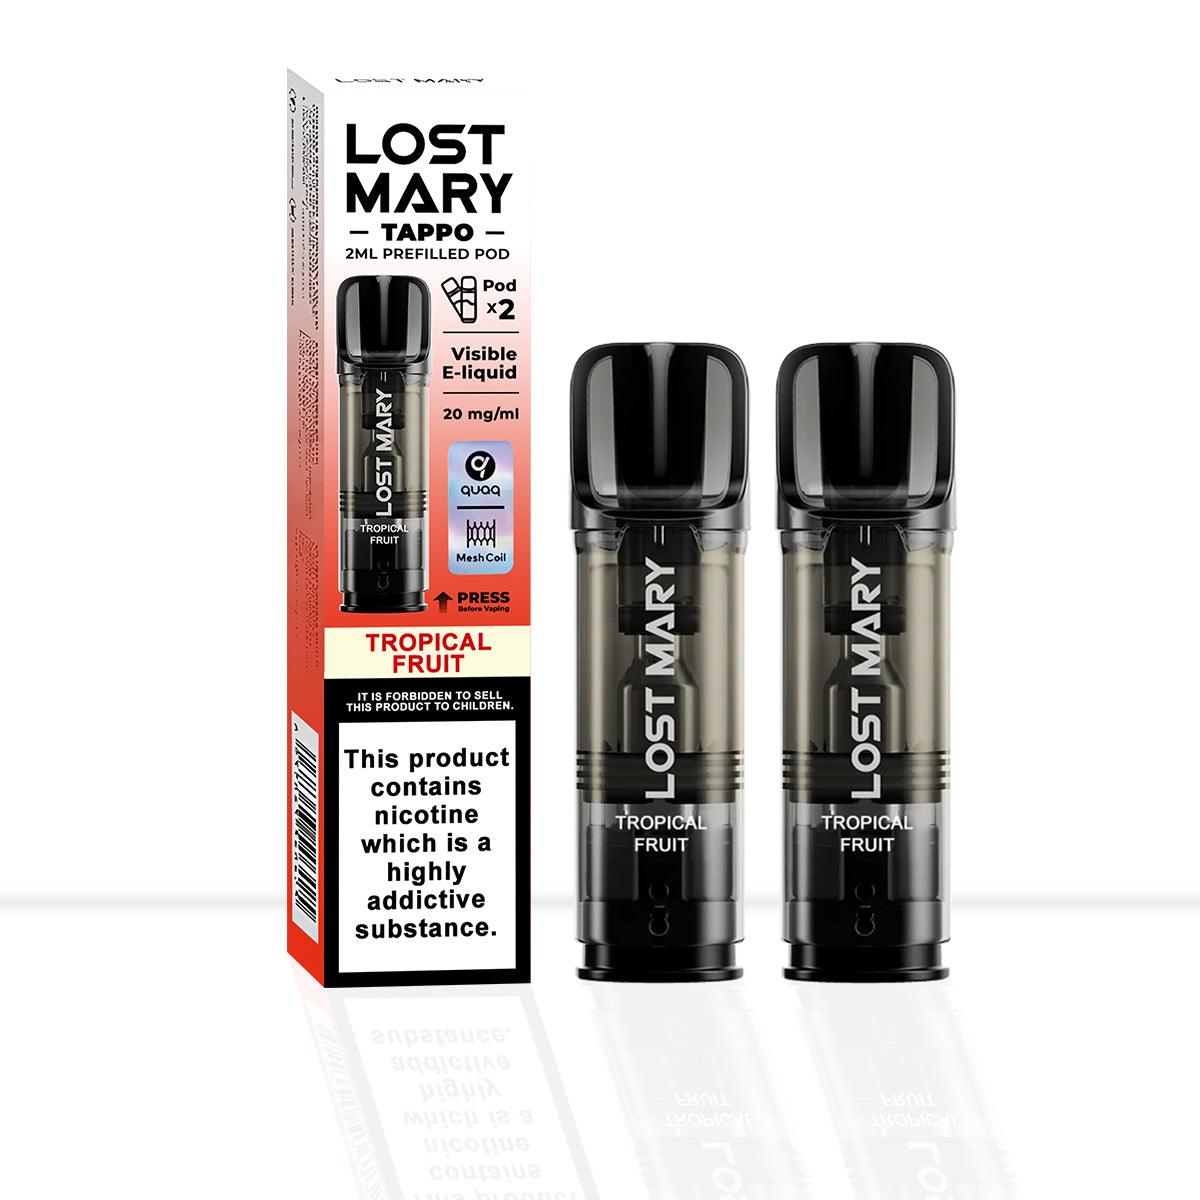 Lost Mary Tappo Tropical Fruit Vape Pods - Lost Mary Tappo Tropical Fruit Vape Pods - Pod & Refills